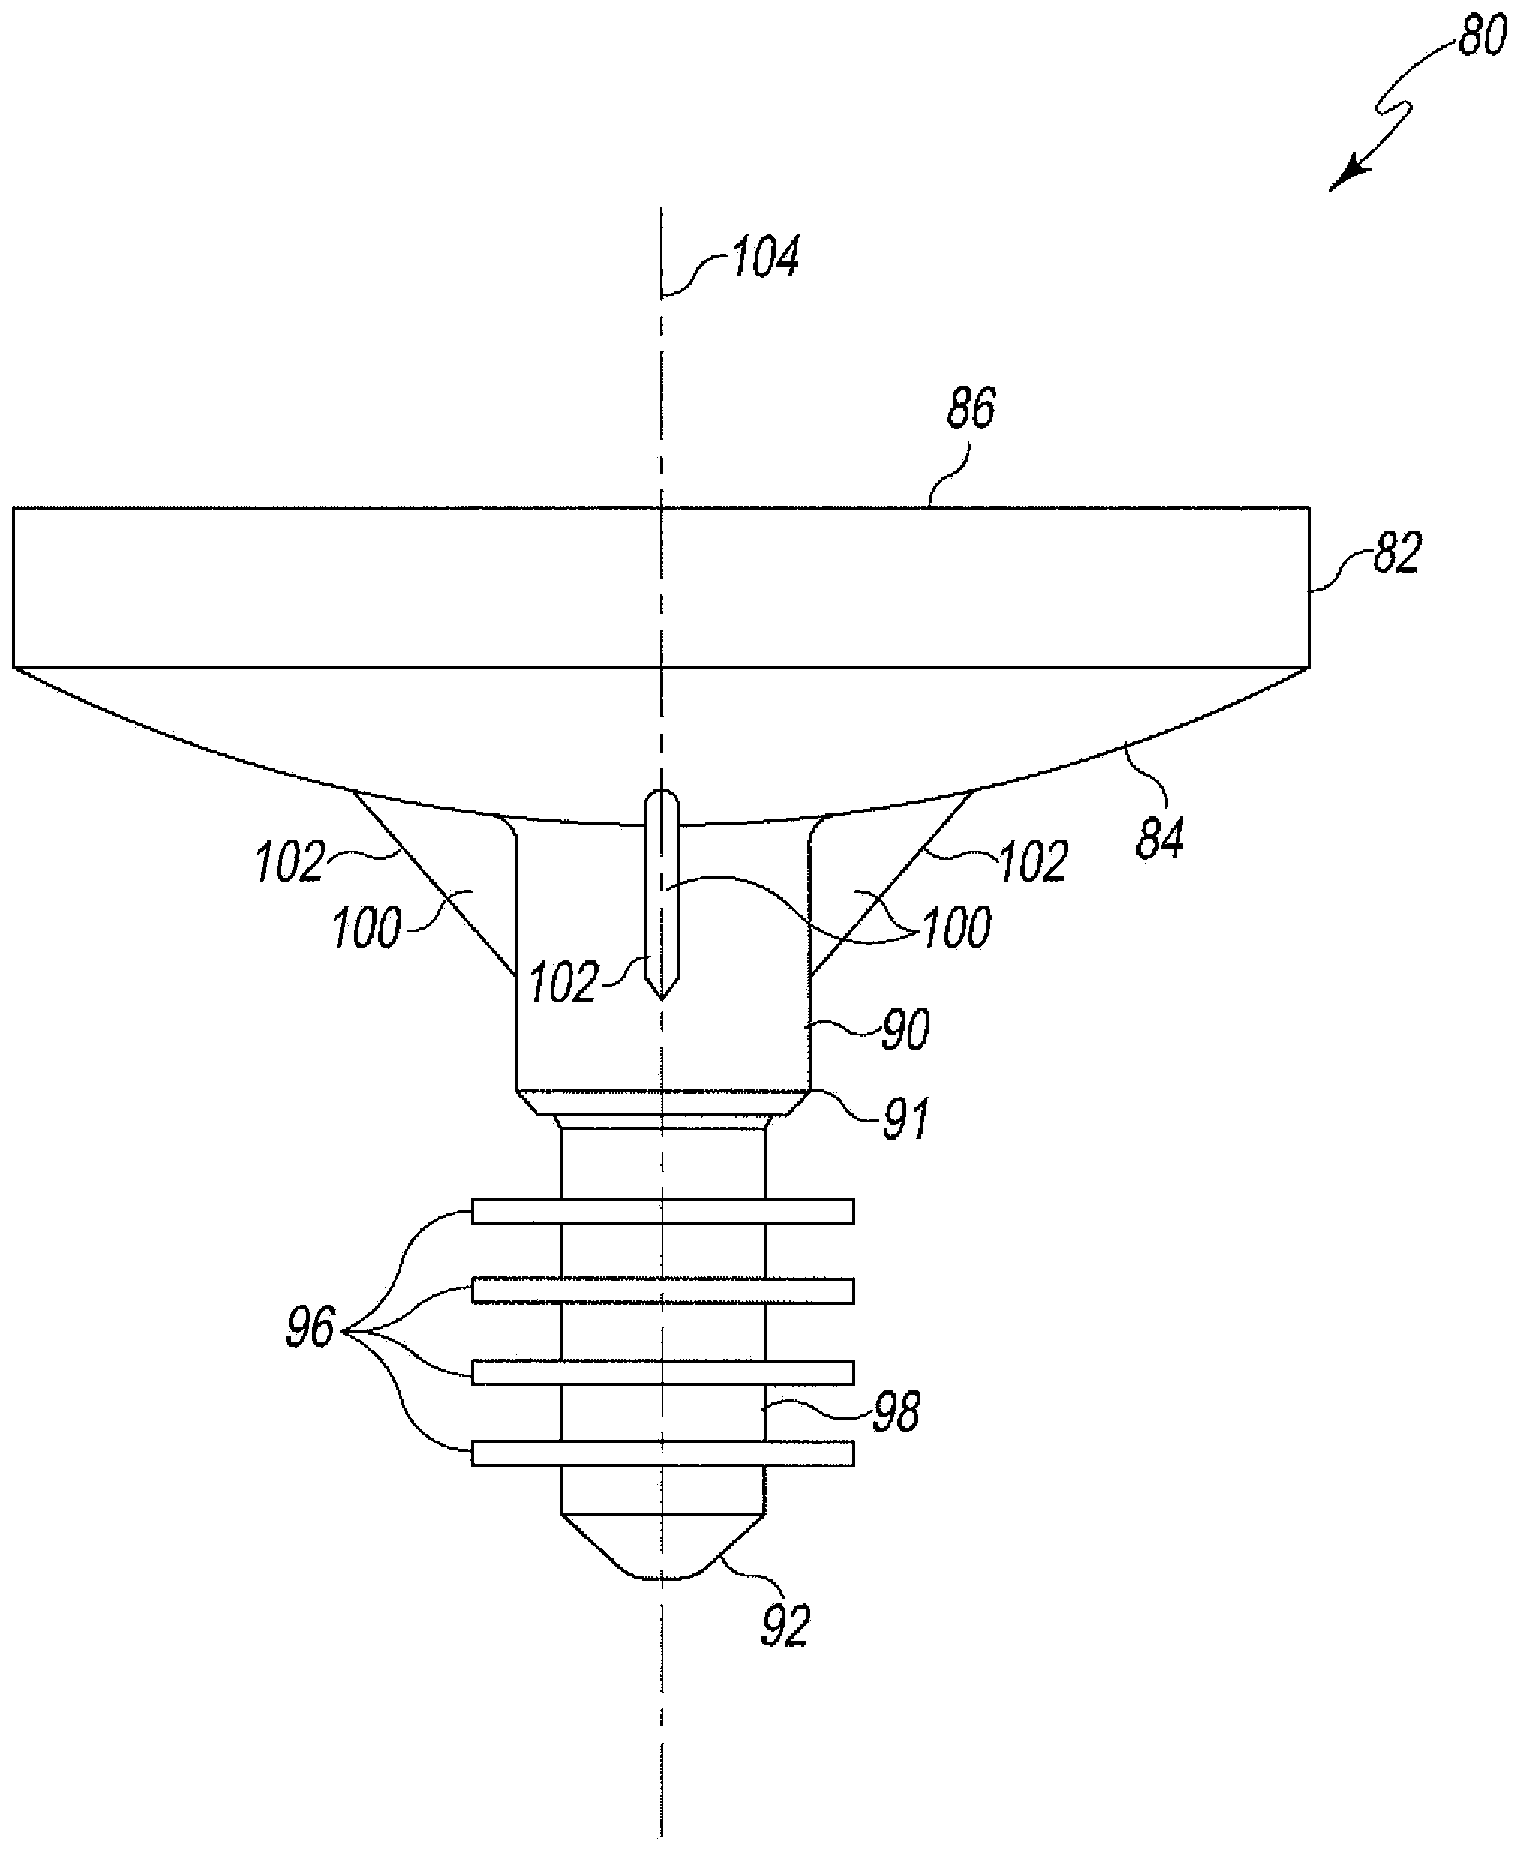 Modified glenoid components and methods of installing same